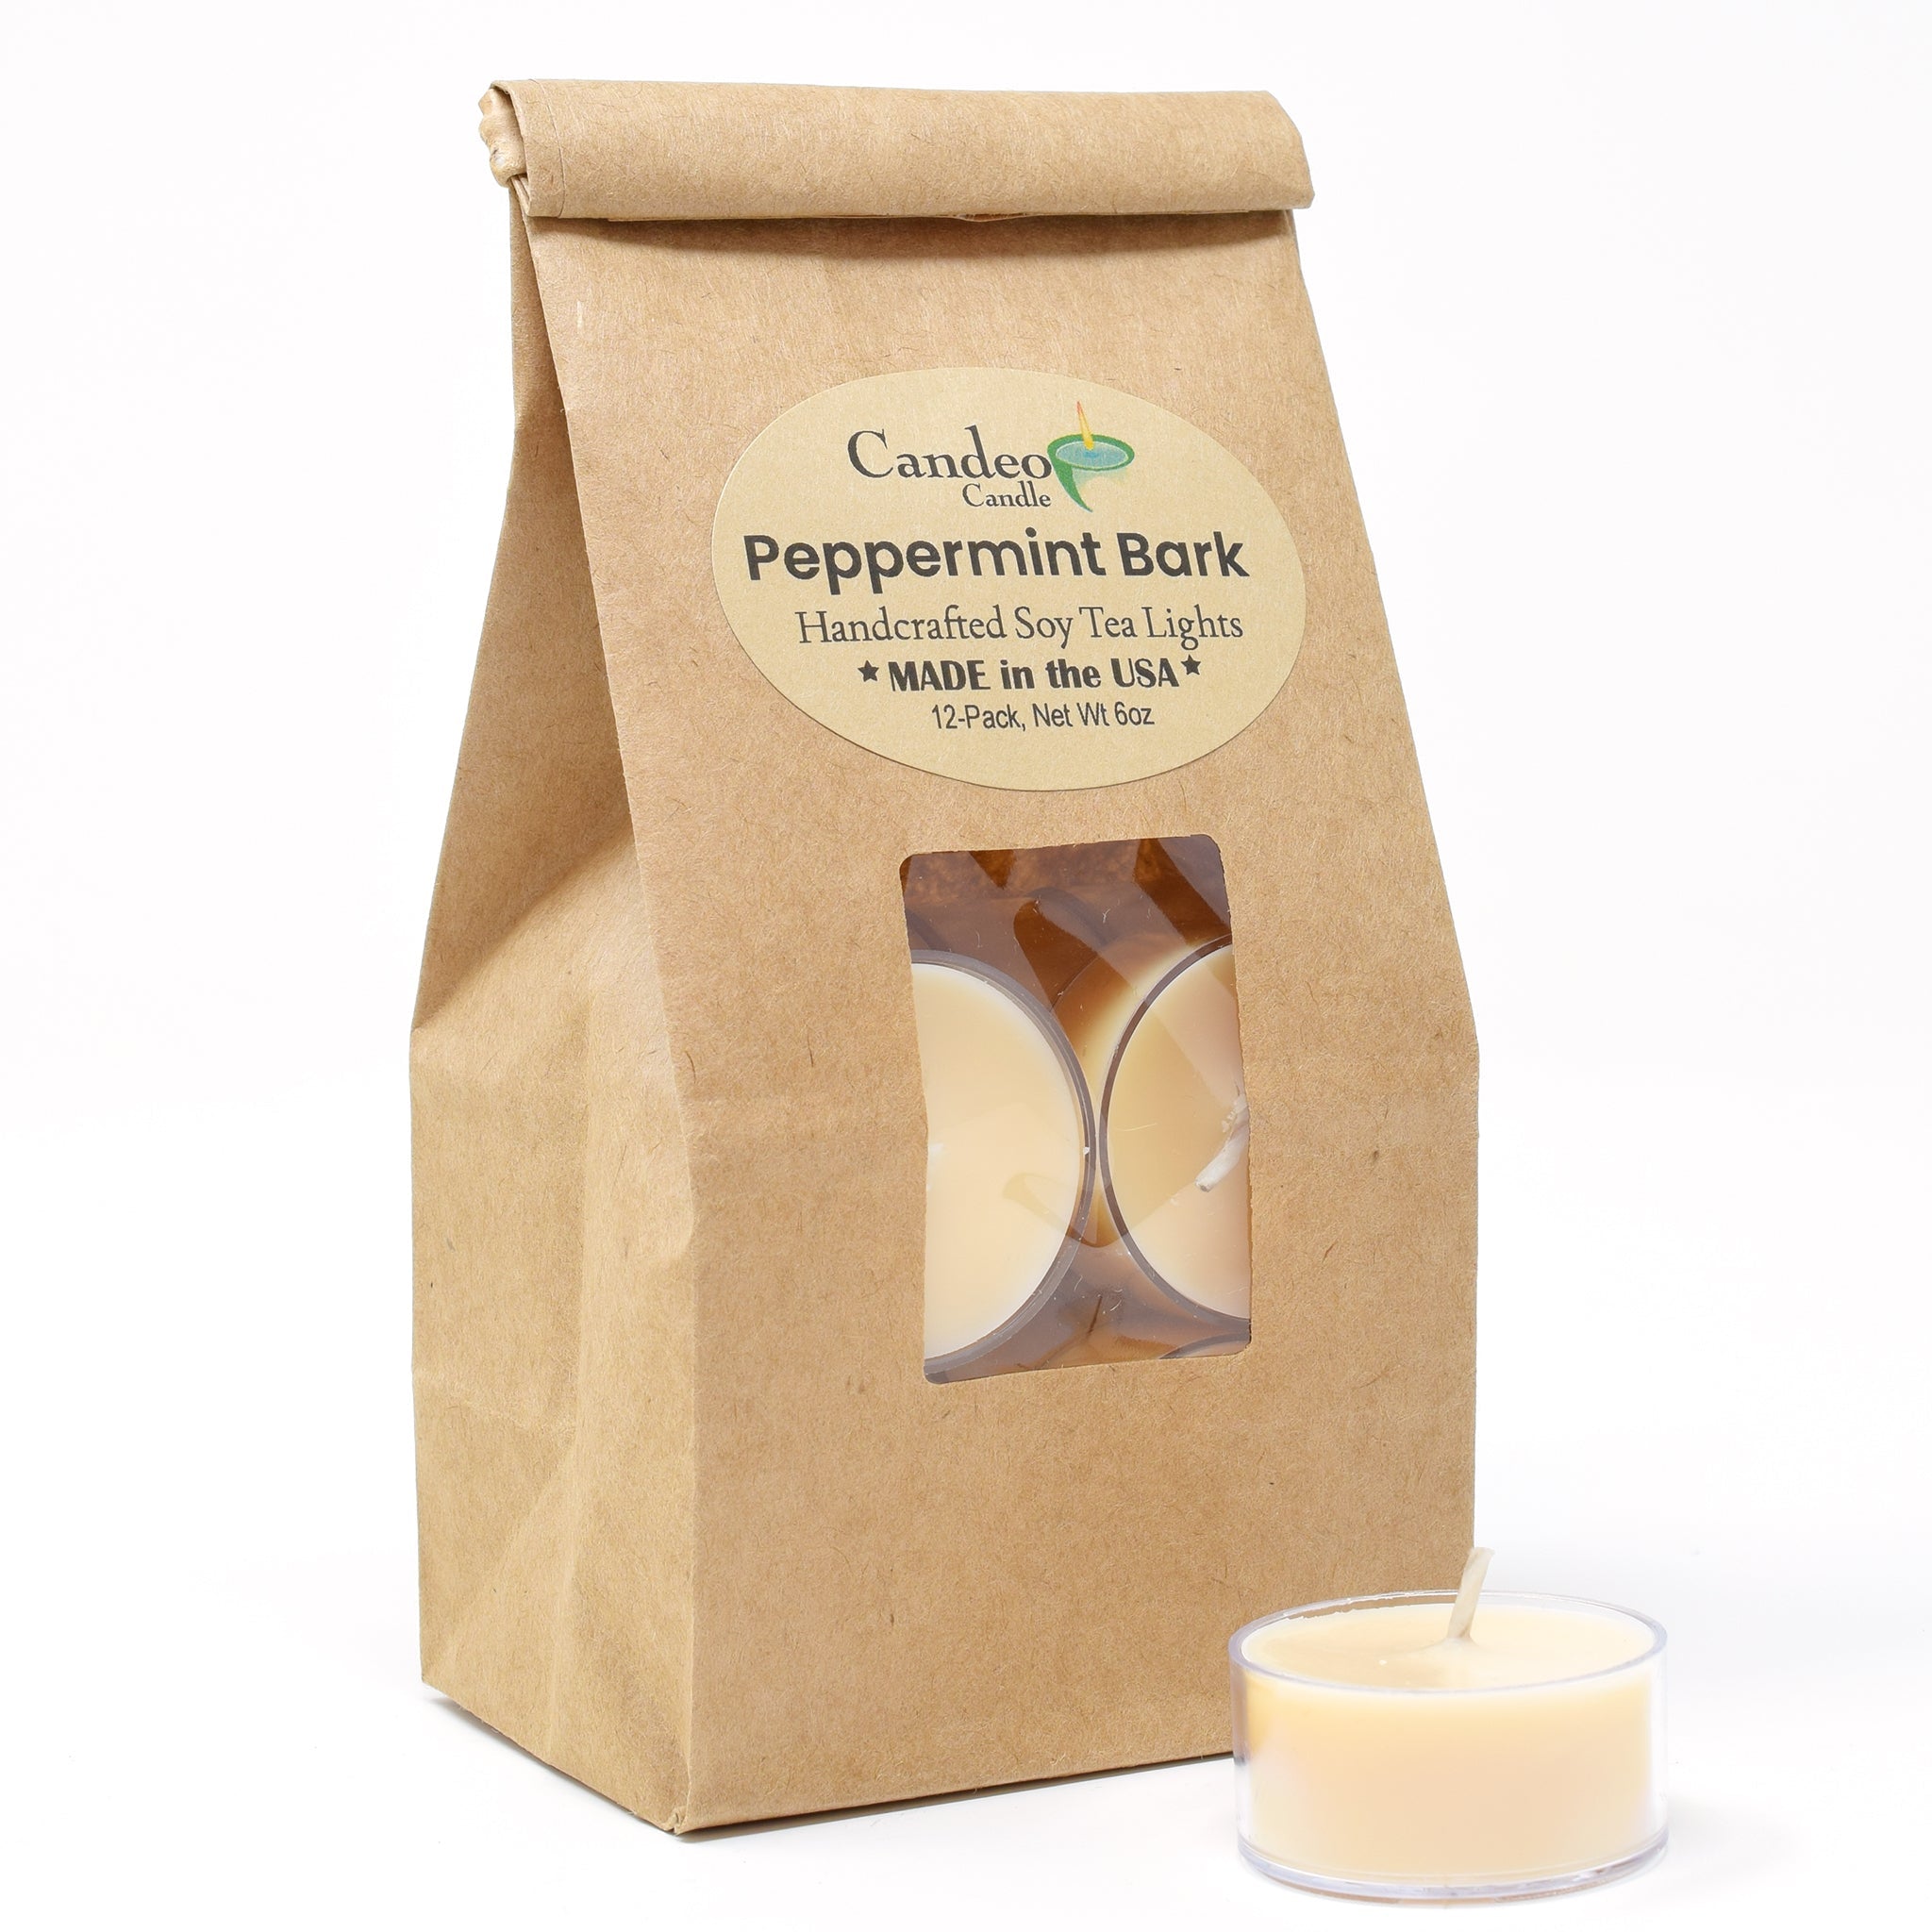 Peppermint Bark, Soy Tea Light 12-Pack - Candeo Candle